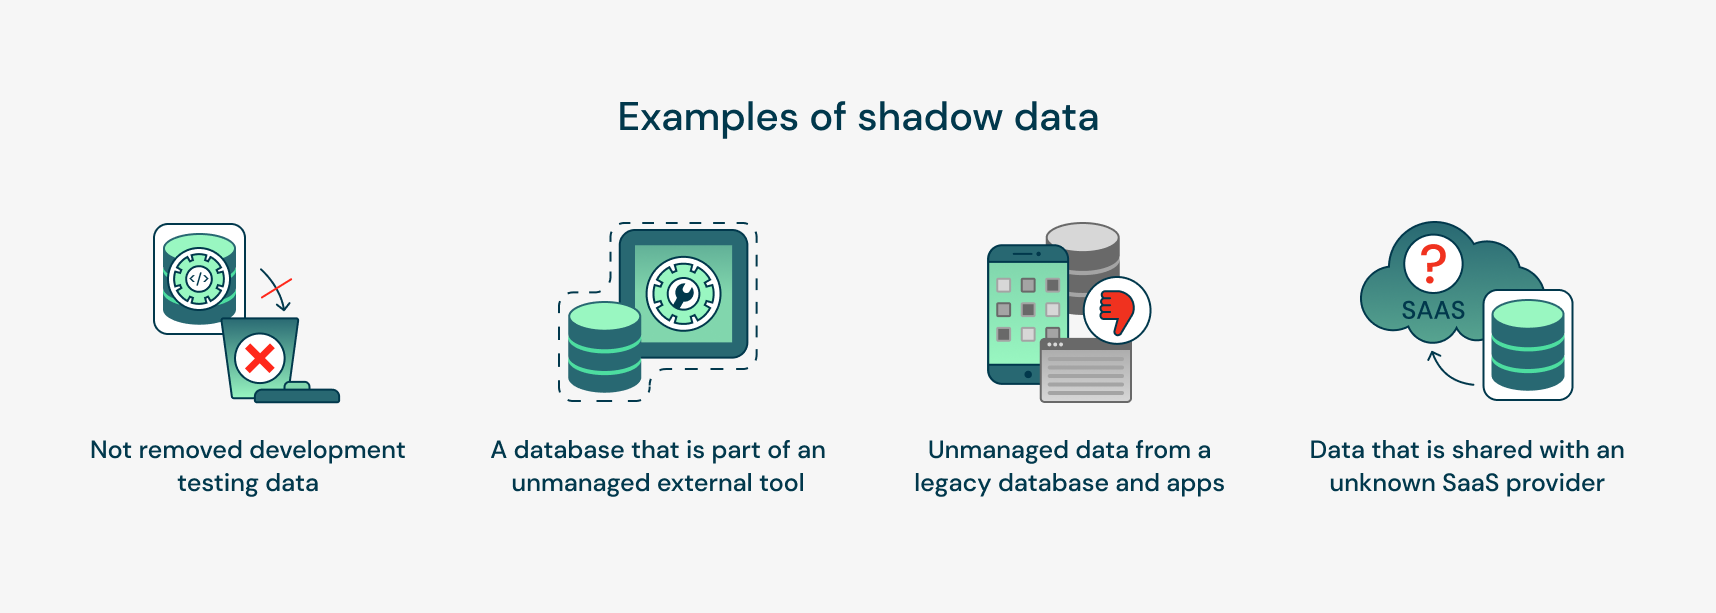 Shadow data examples